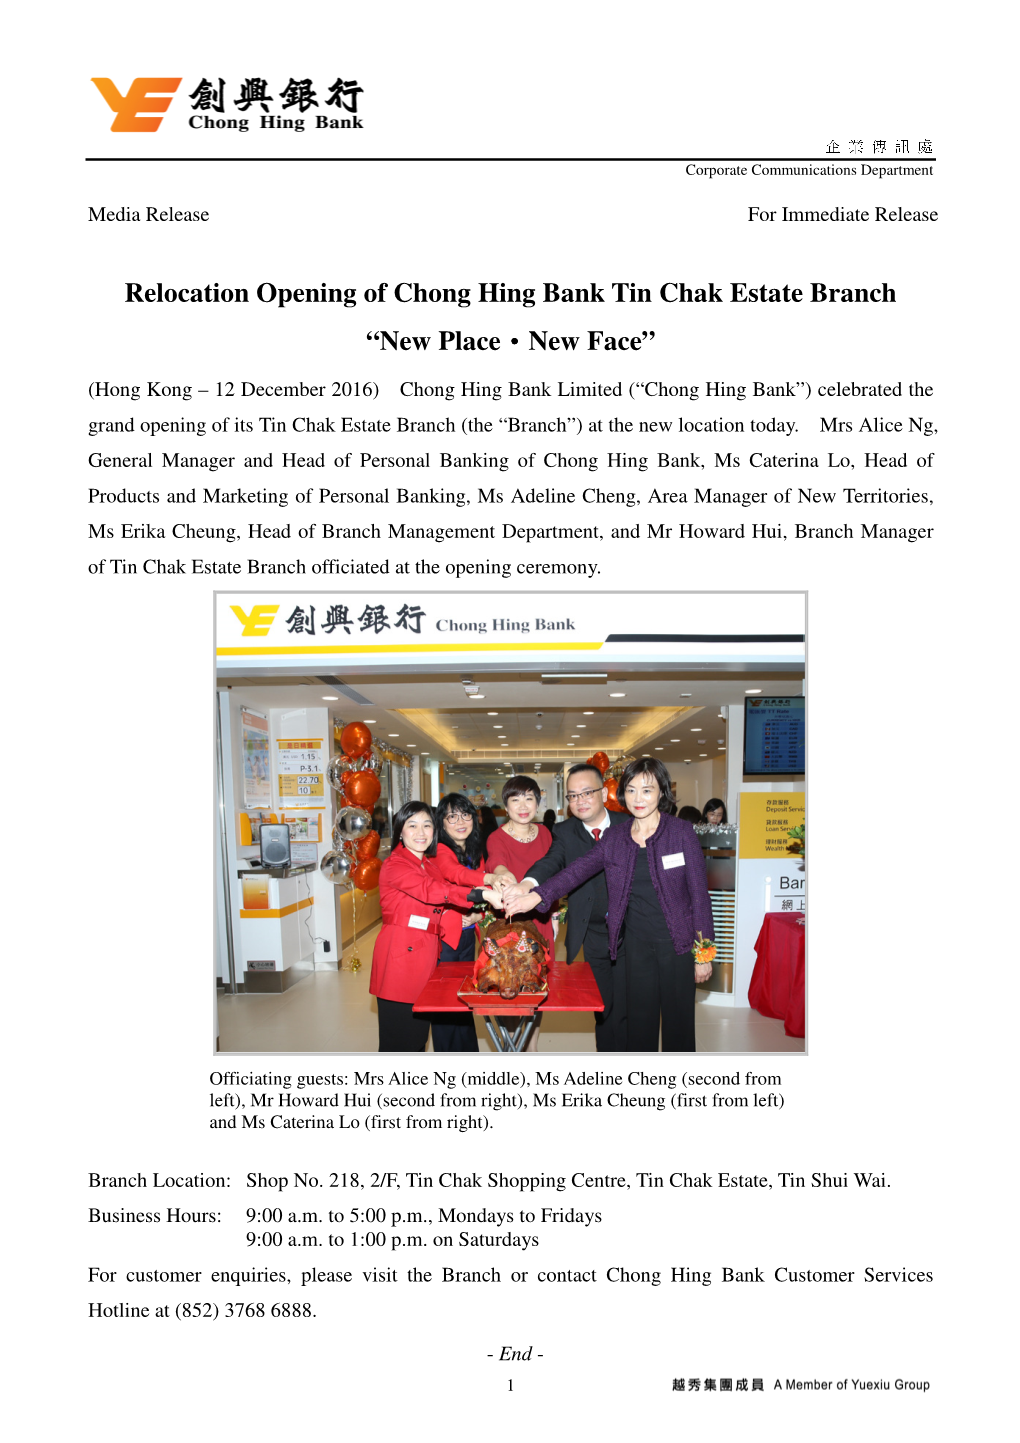 Relocation Opening of Chong Hing Bank Tin Chak Estate Branch “New Place ‧‧‧New Face”